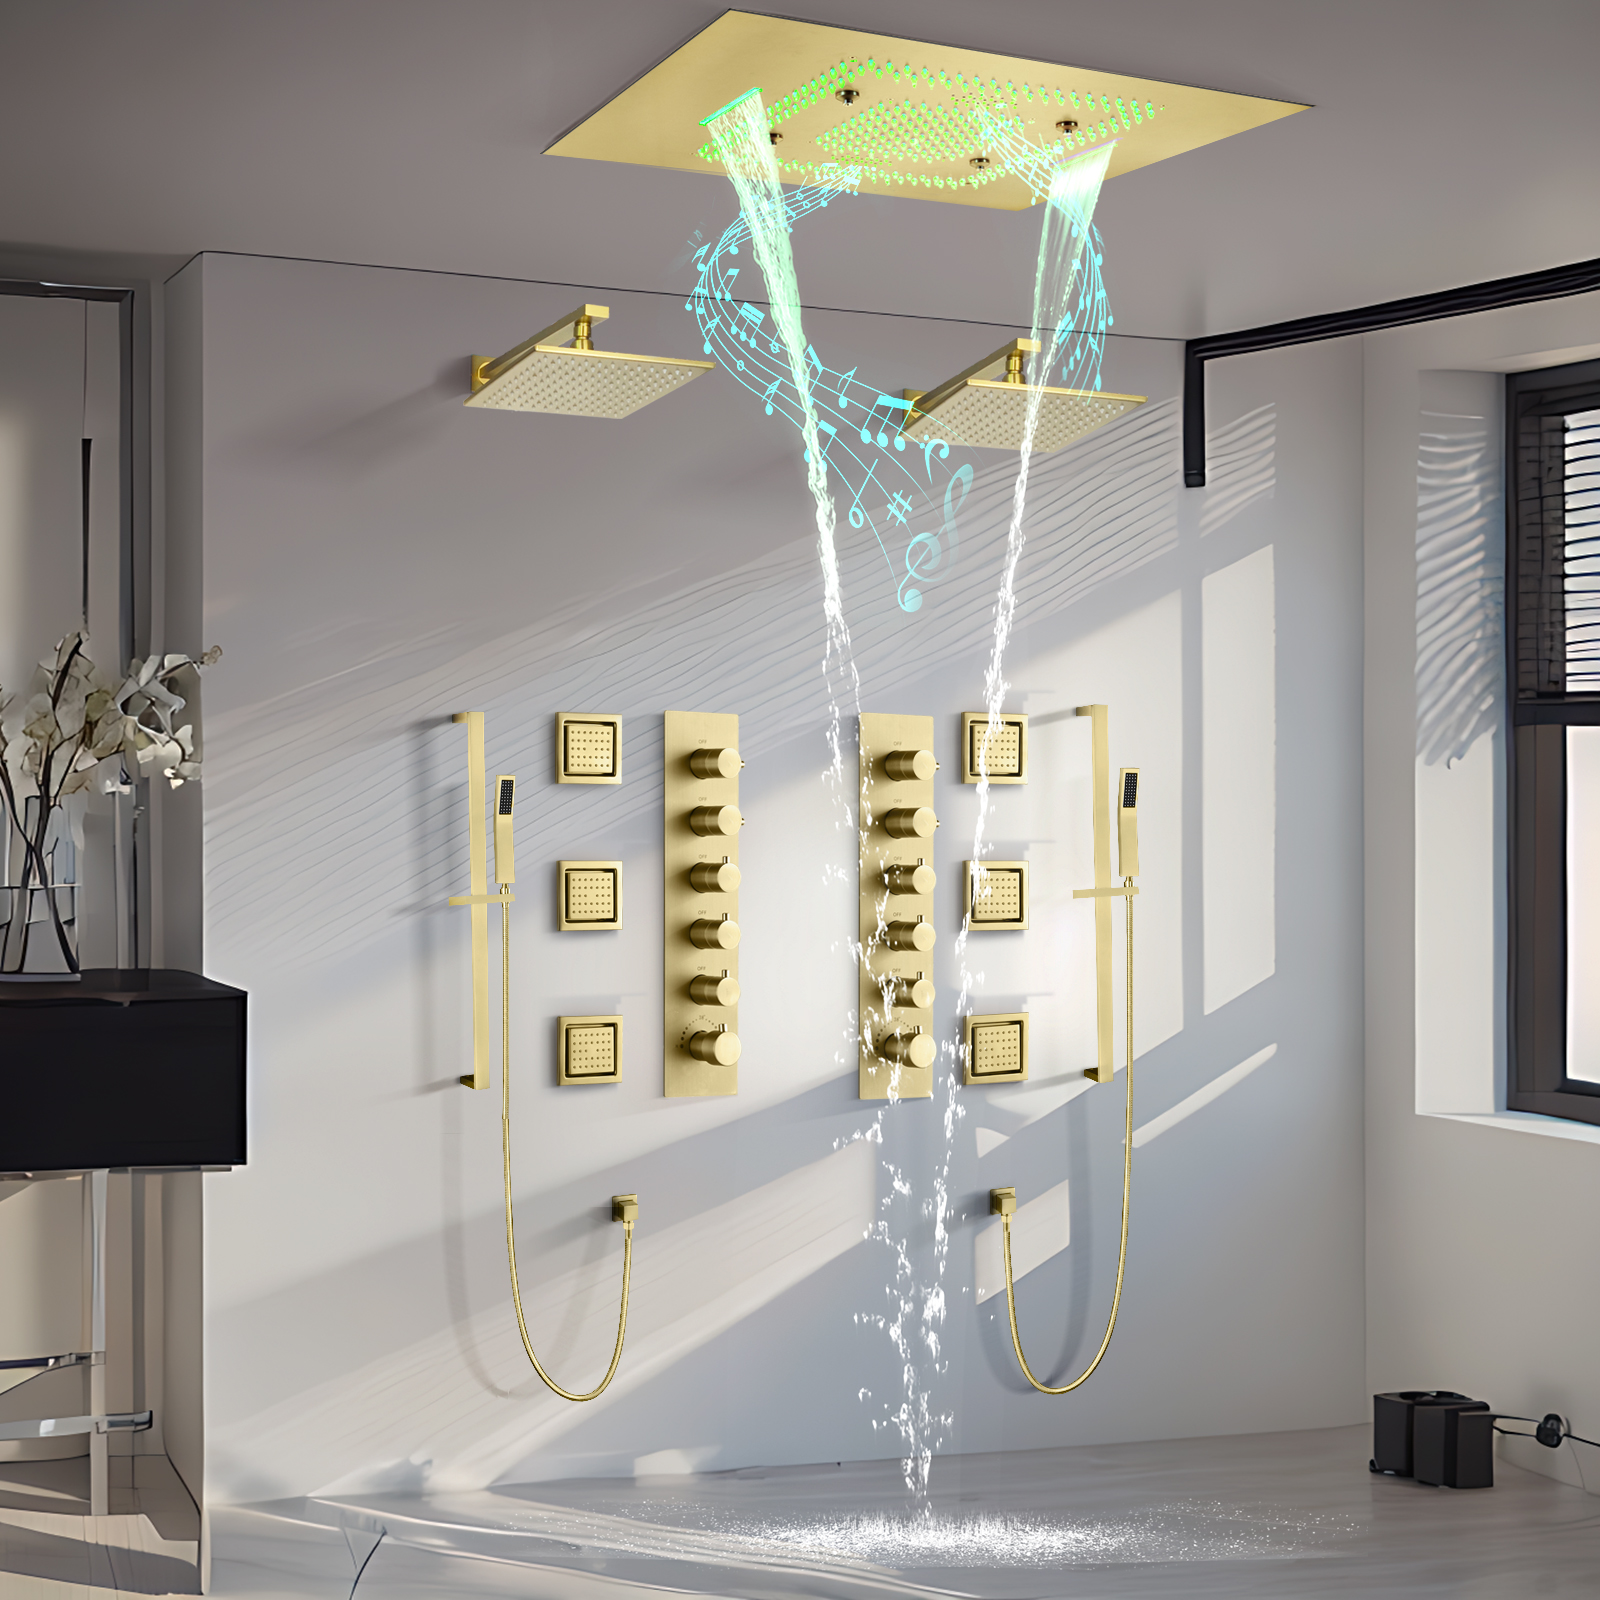 Transform Your Shower Experience with LED Shower Heads